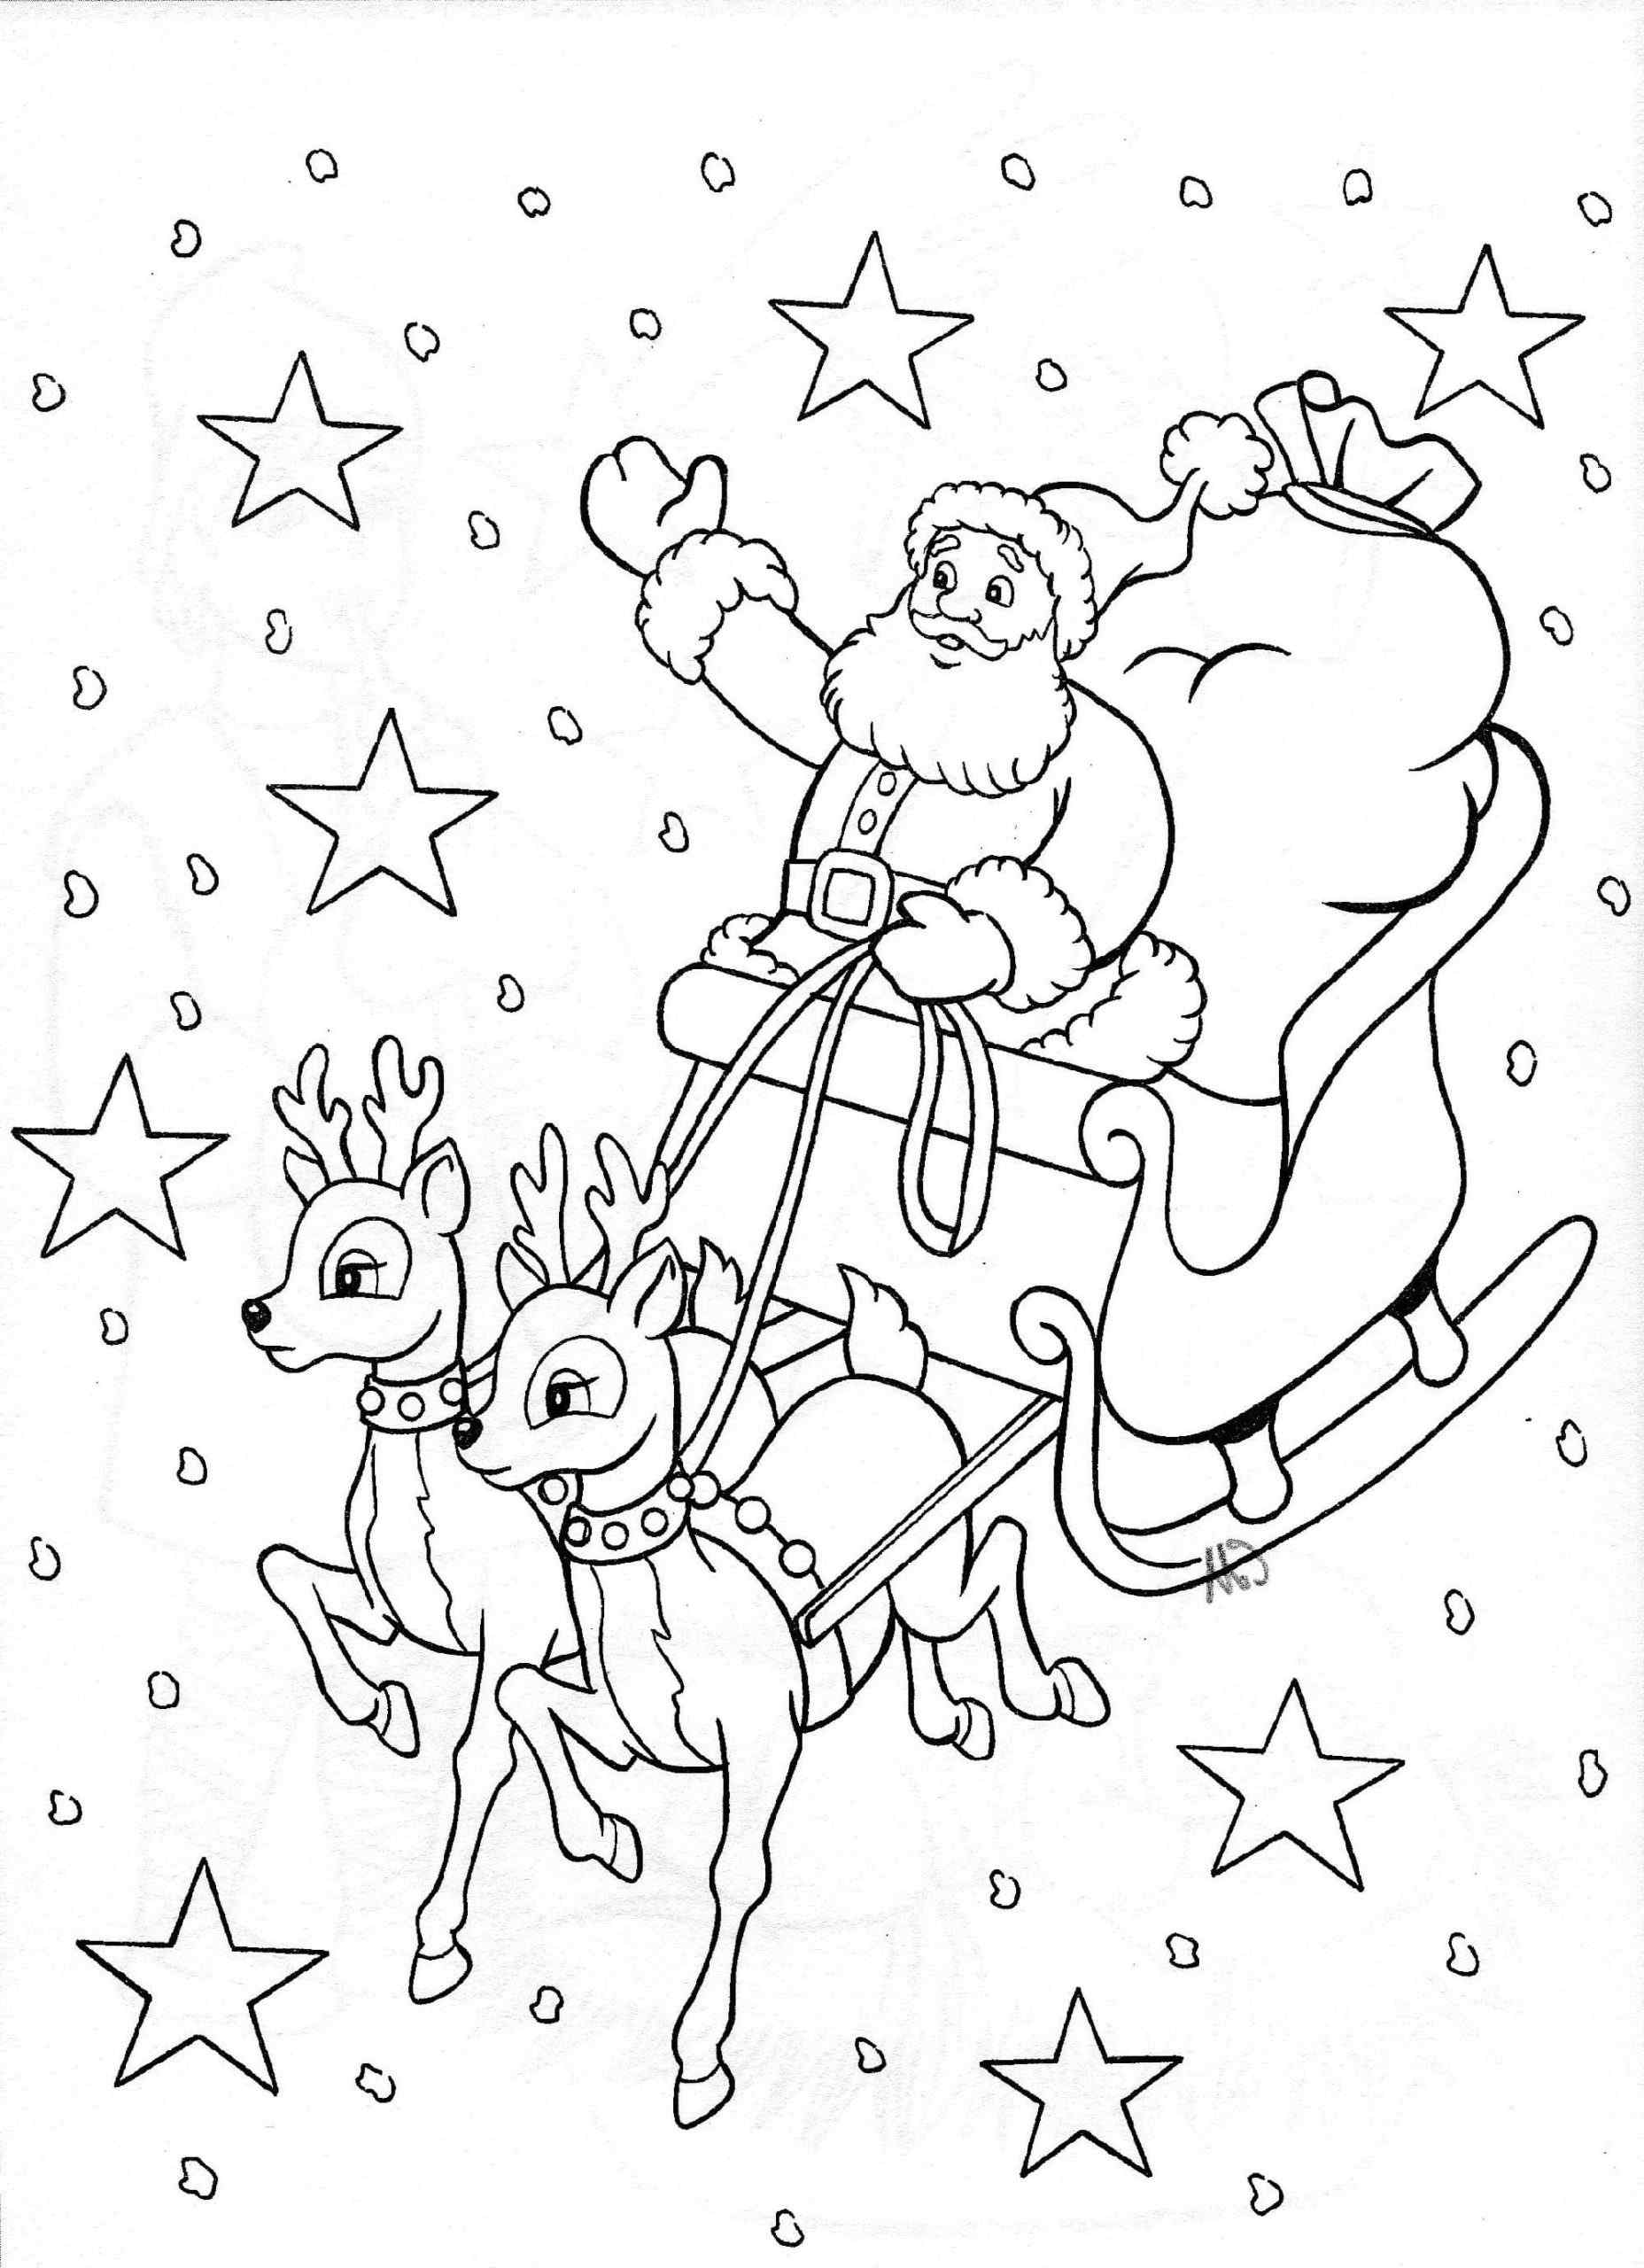 Stars Envelop Santa’s Christmas Carriage Coloring Page